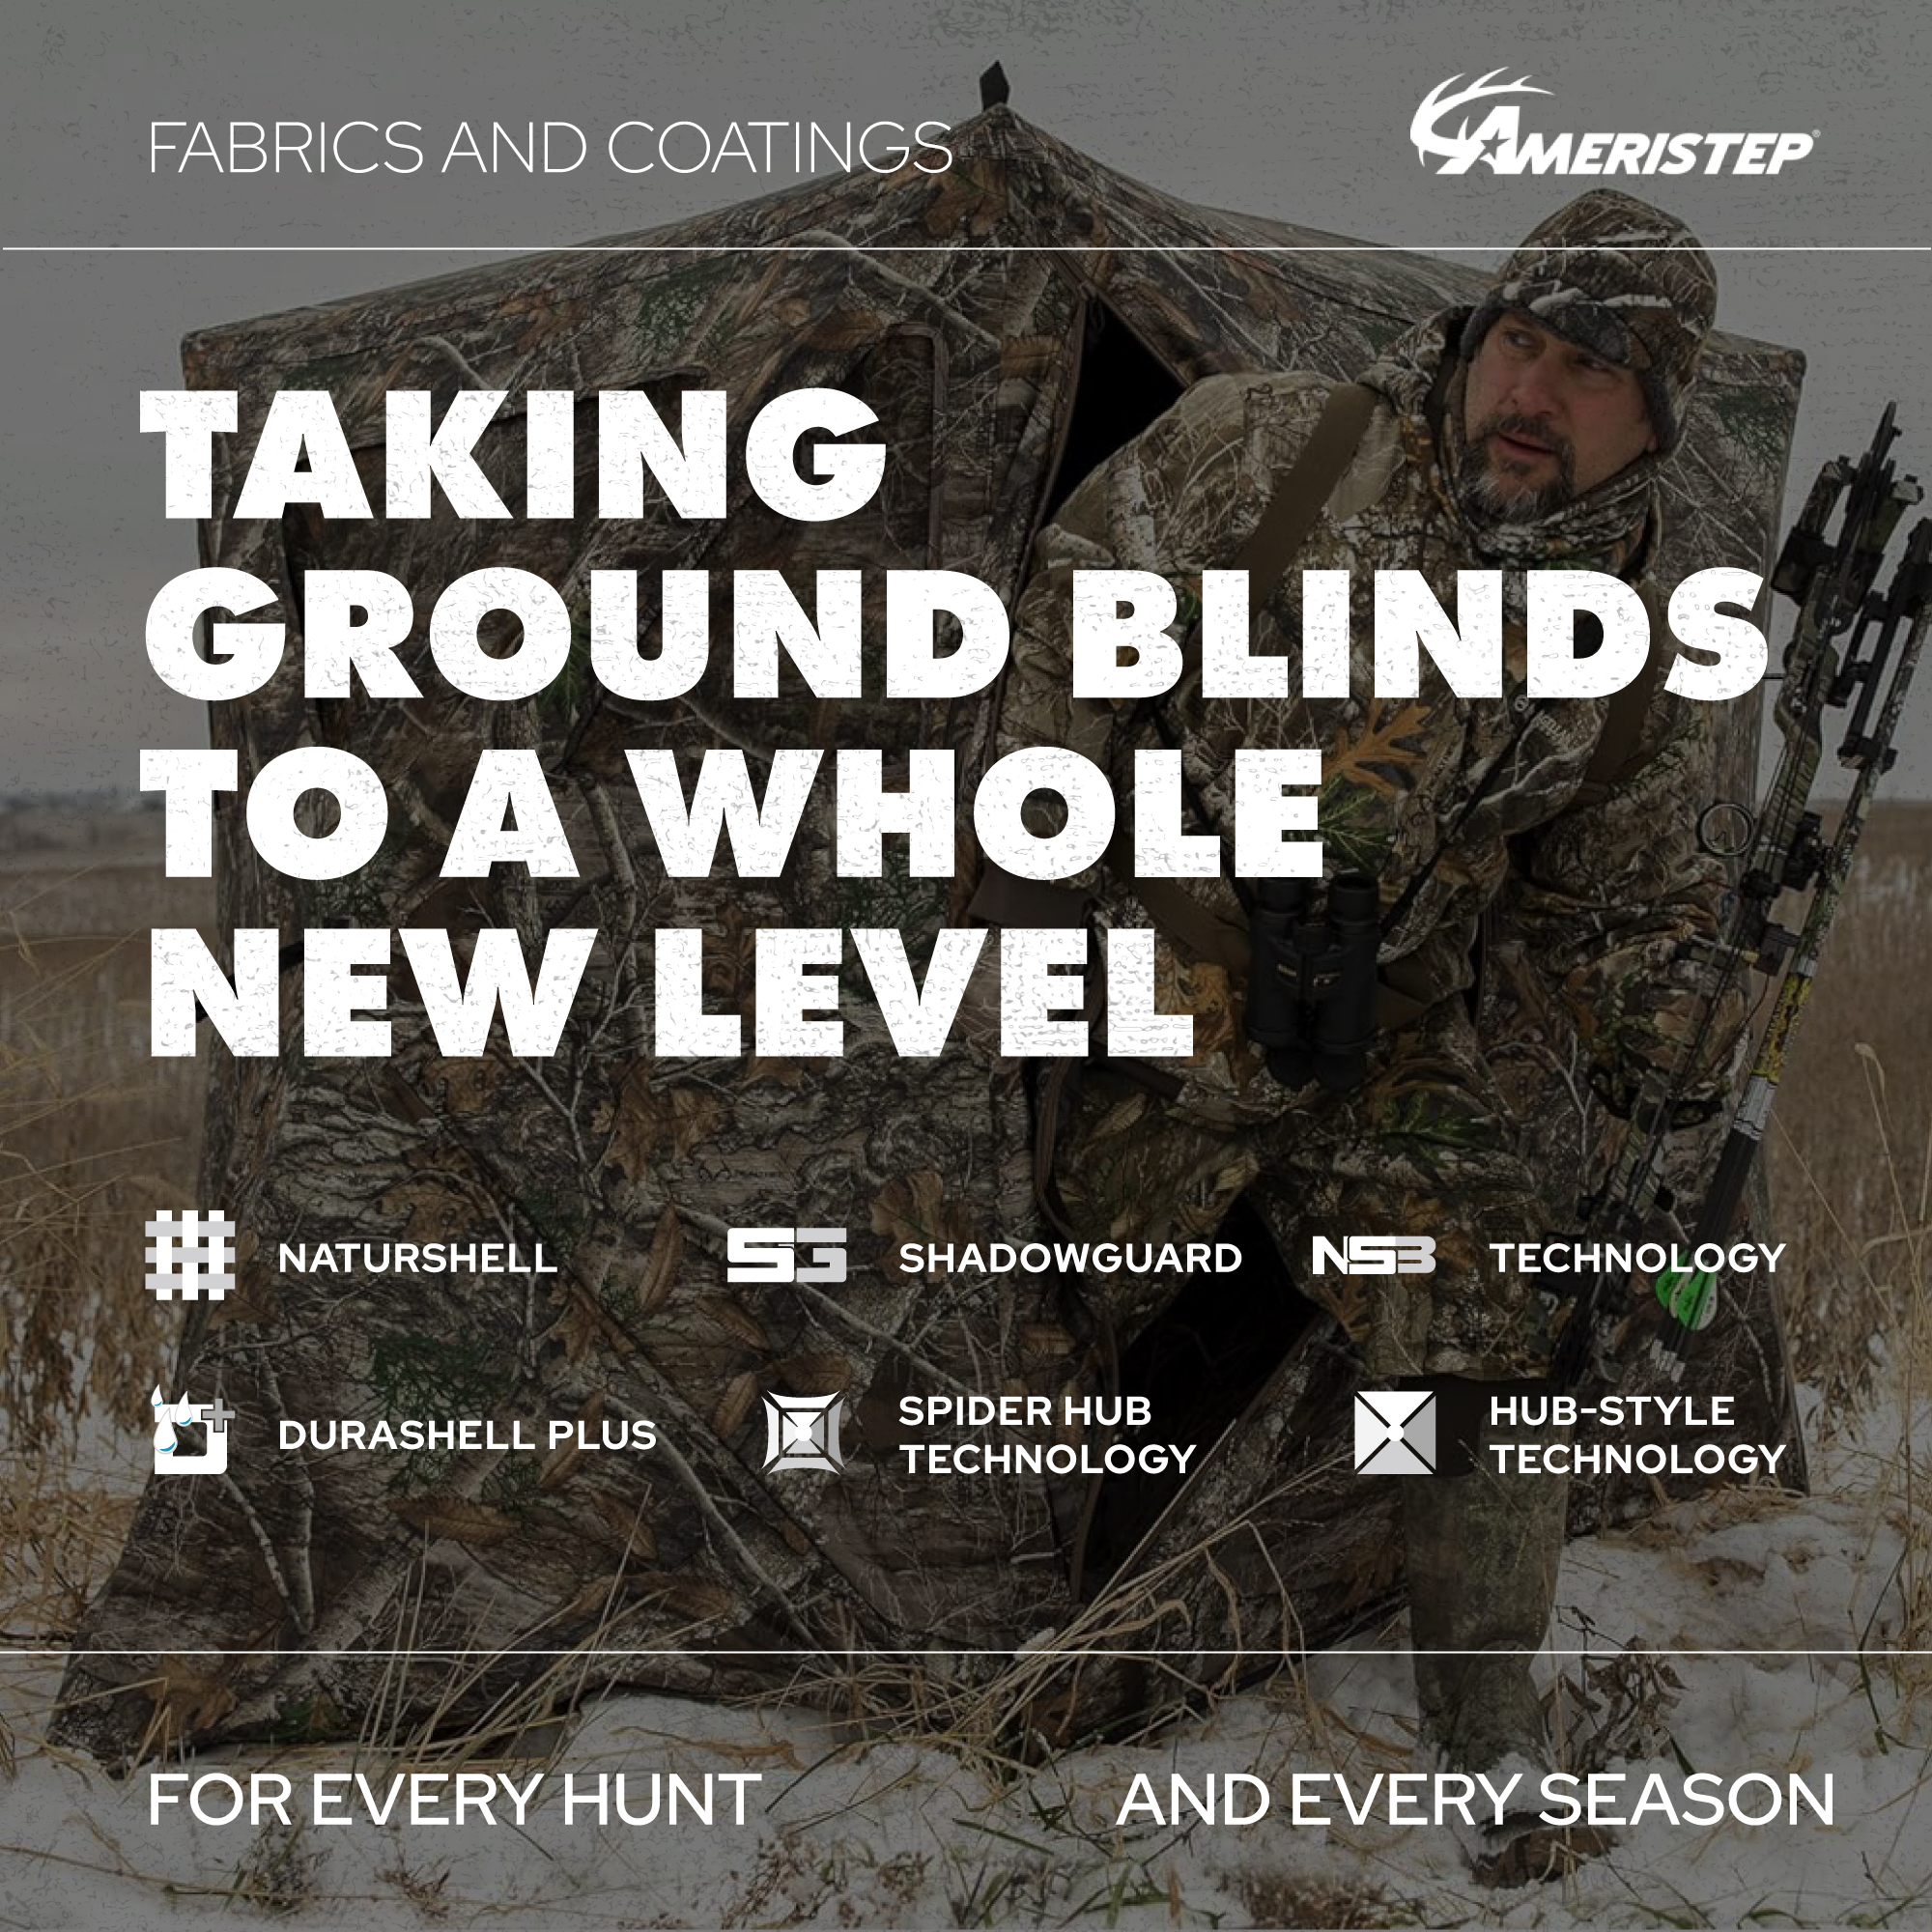 Plano Ameristep Care Taker Outdoor 2 Person Kick Out Hunting Blind, Camo - image 3 of 9